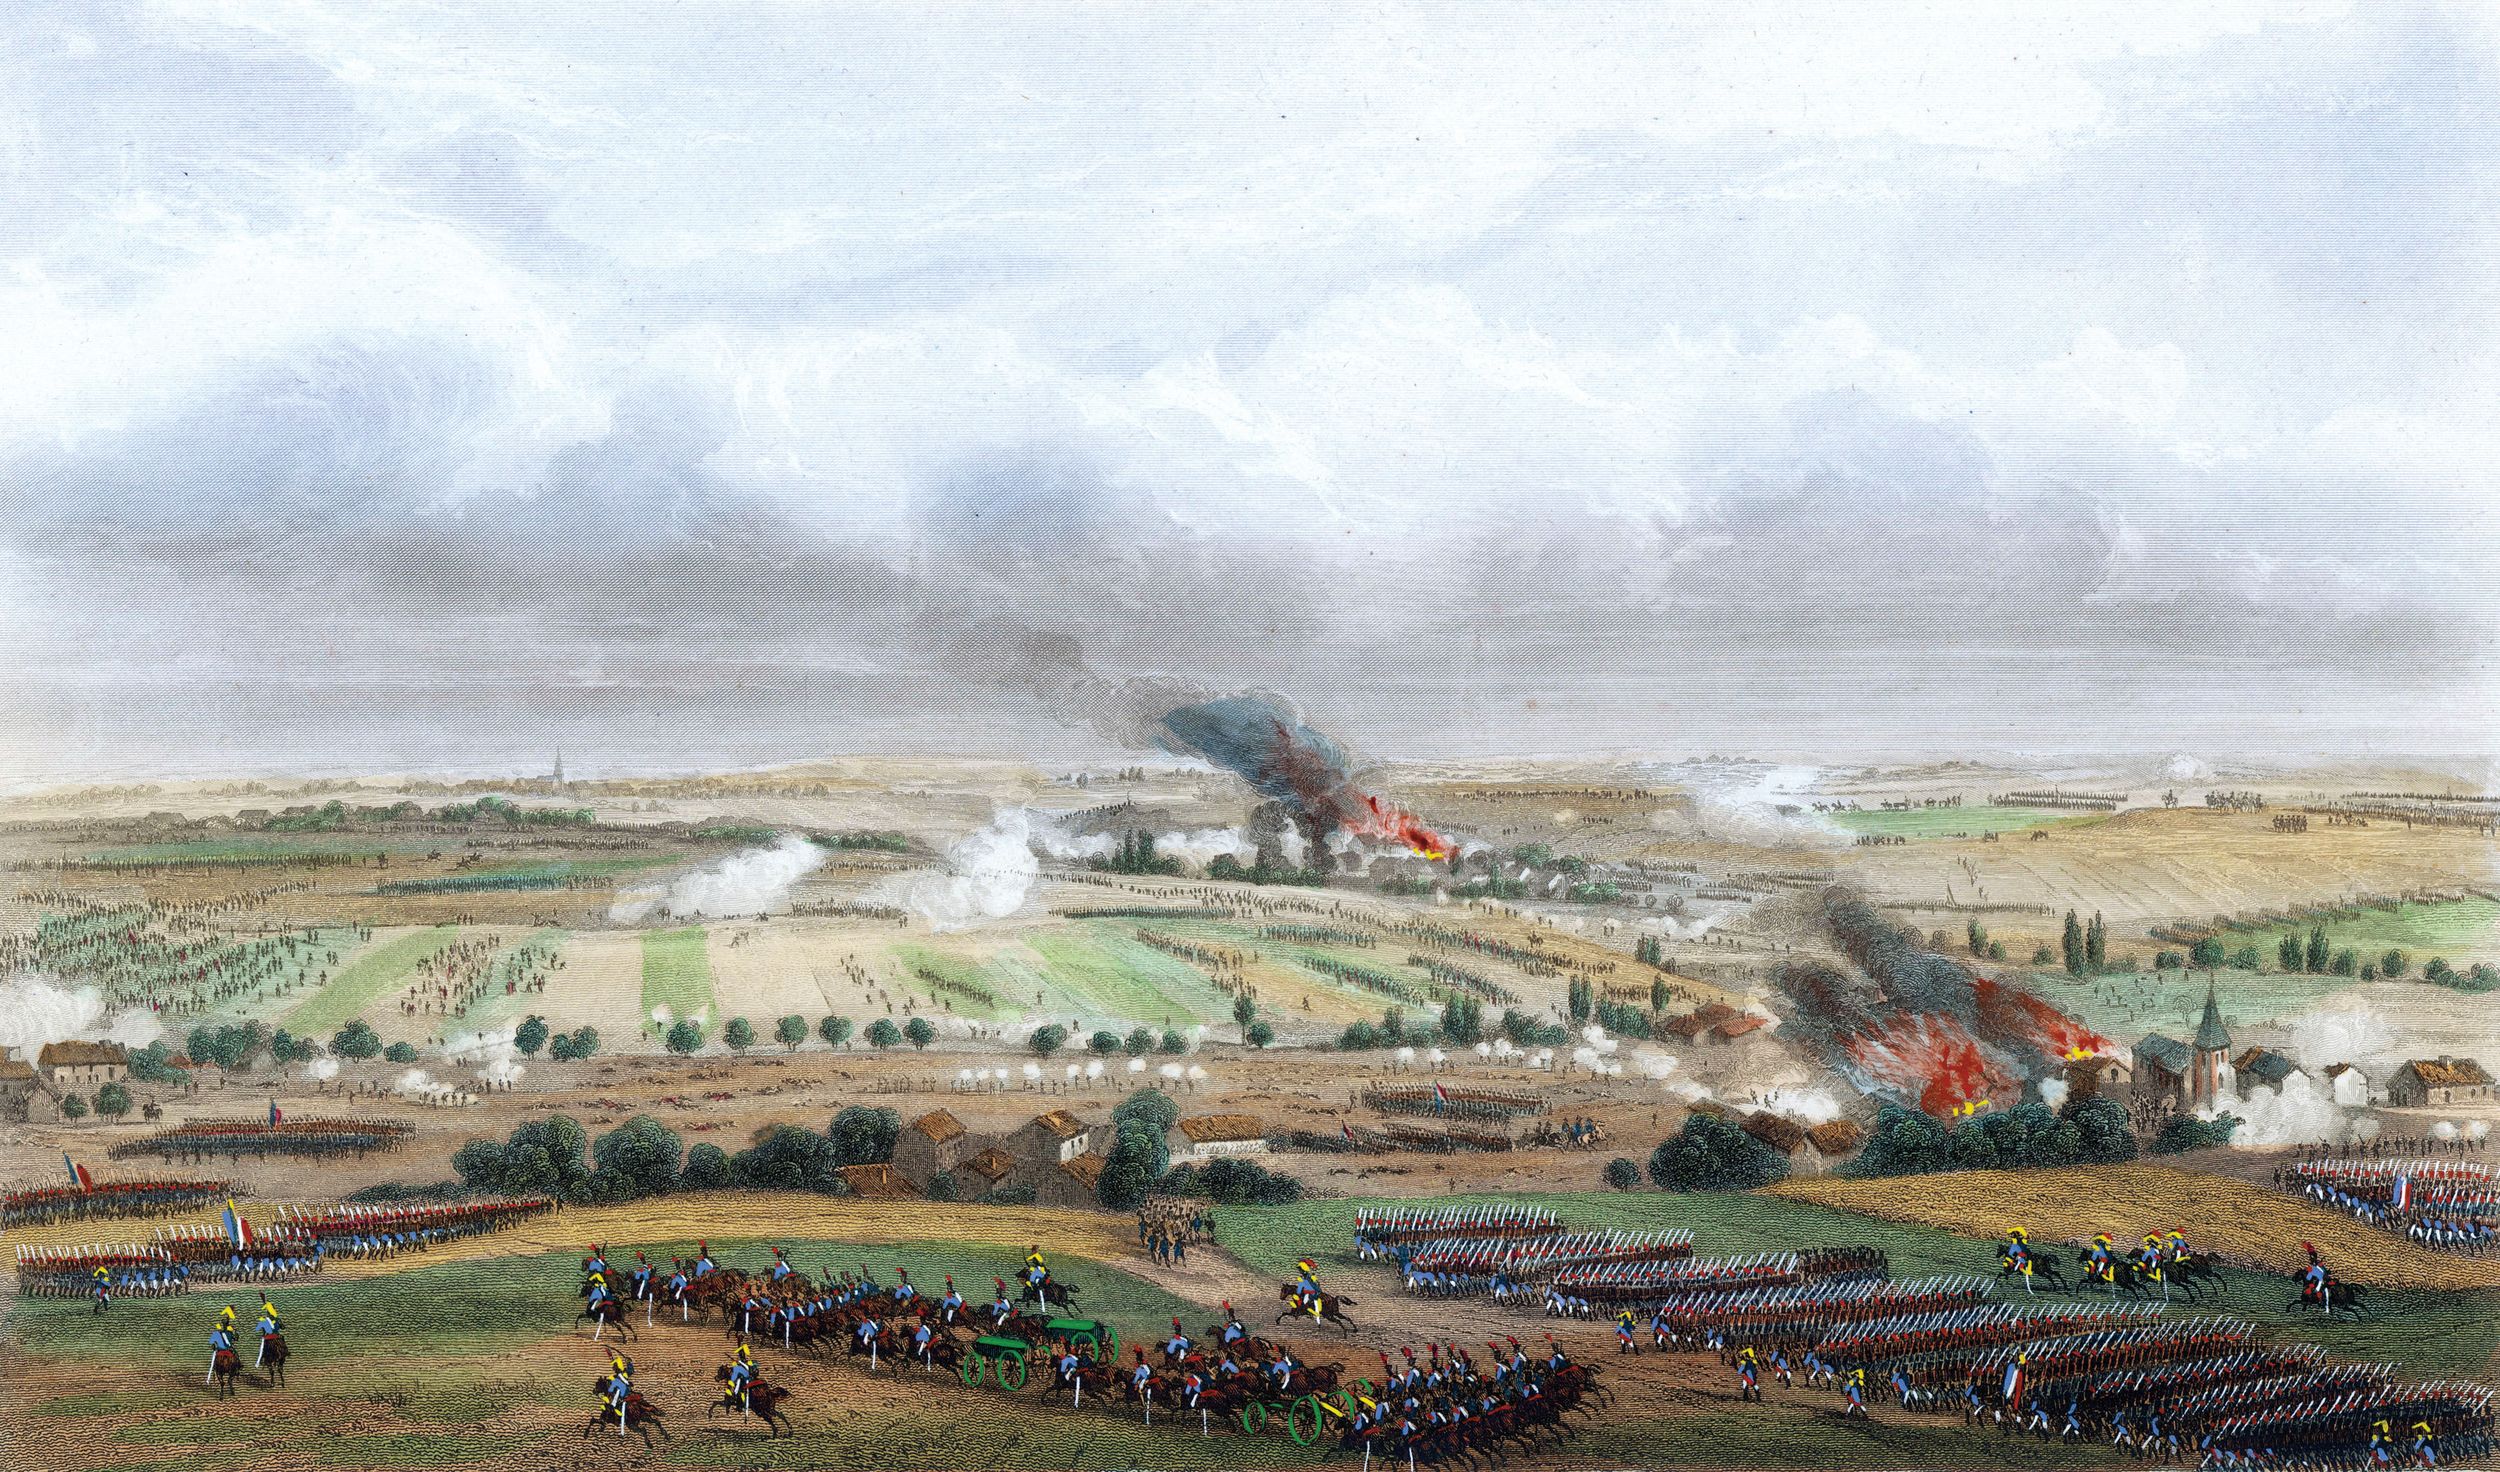 A panoramic view of the Ligny battlefield shows French forces advancing in the foreground over the gently rolling terrain. Approximately 150,000 men participated in the clash two days before Waterloo.